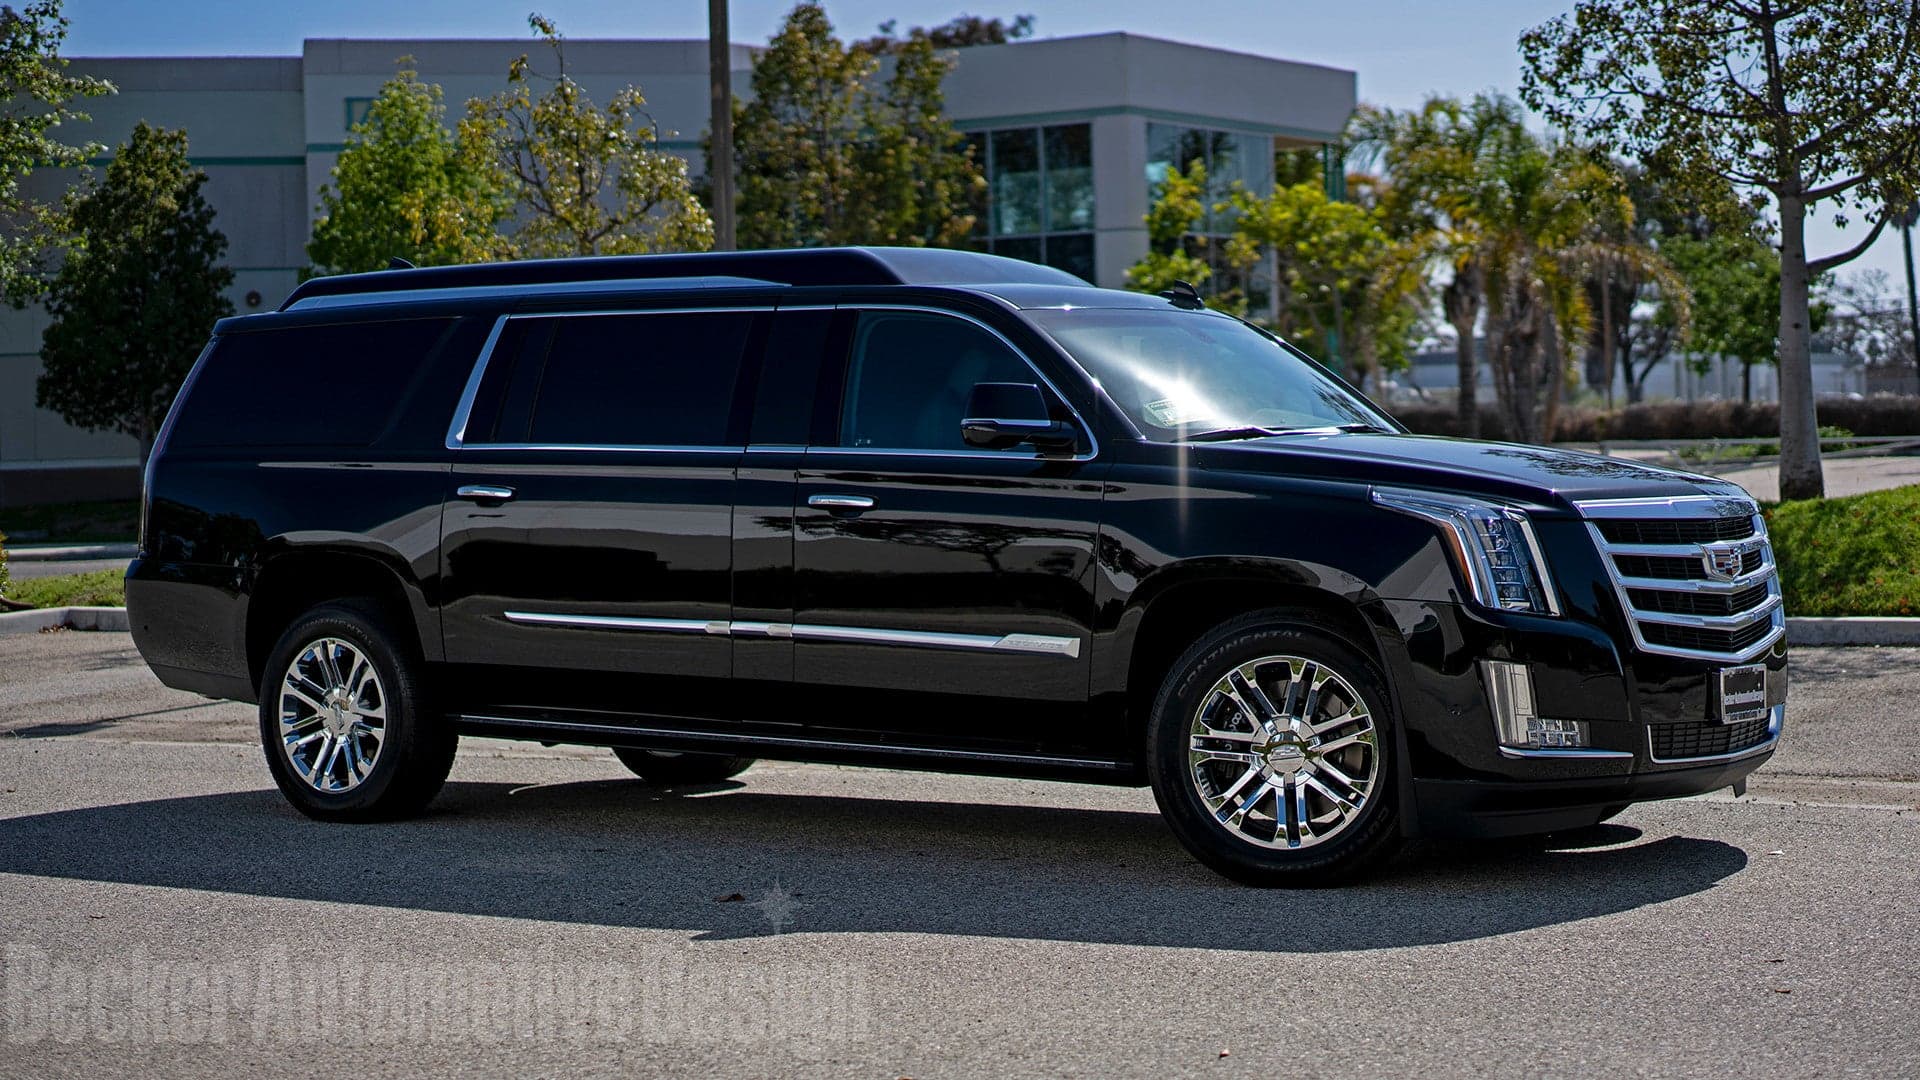 Sylvester Stallone’s Cadillac Escalade Limo Is Your $350,000 Ticket to Neighborhood Fame